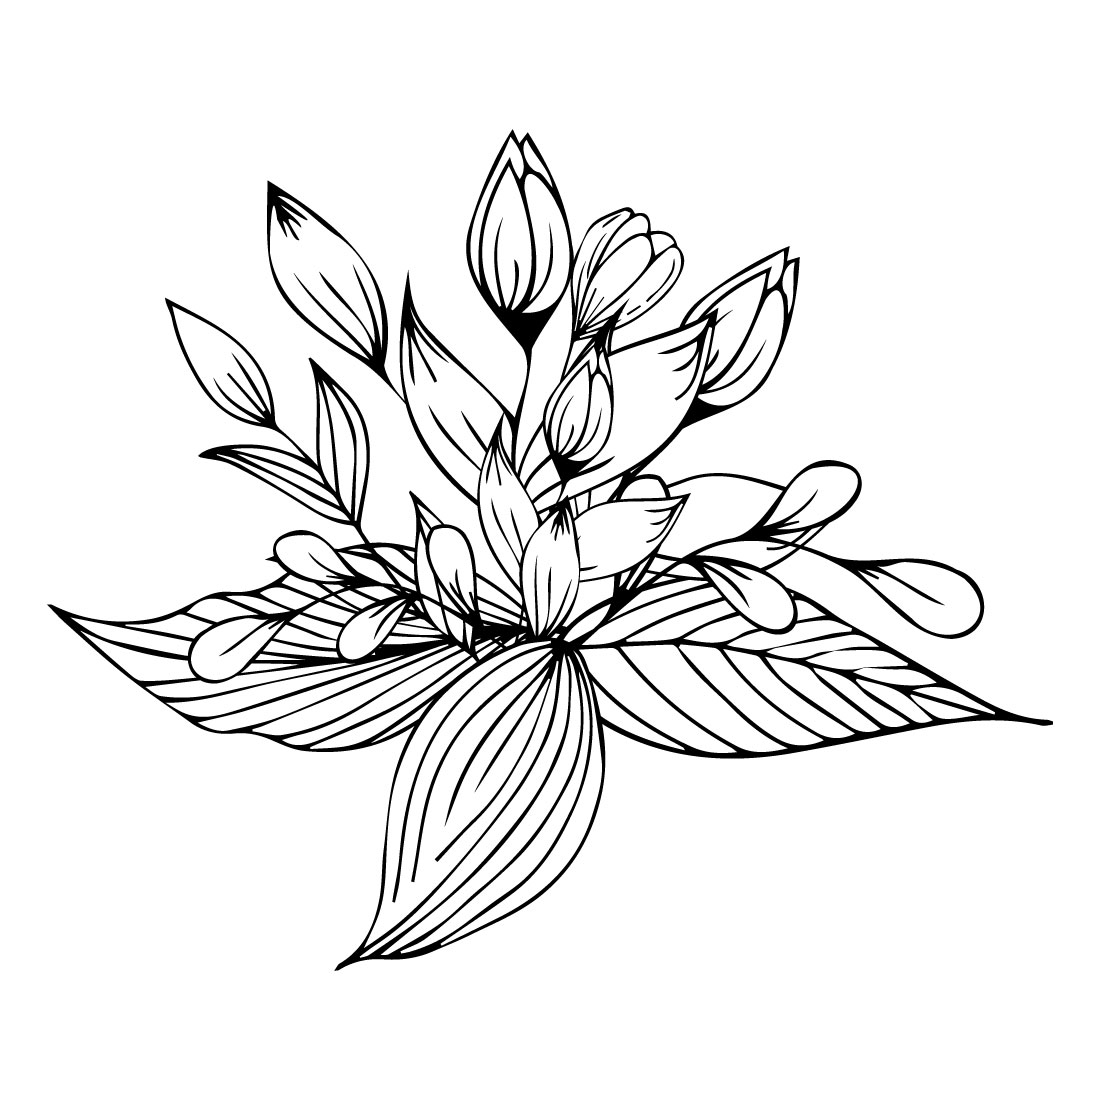 Stylized Floral Elements and Flower Compositions preview image.